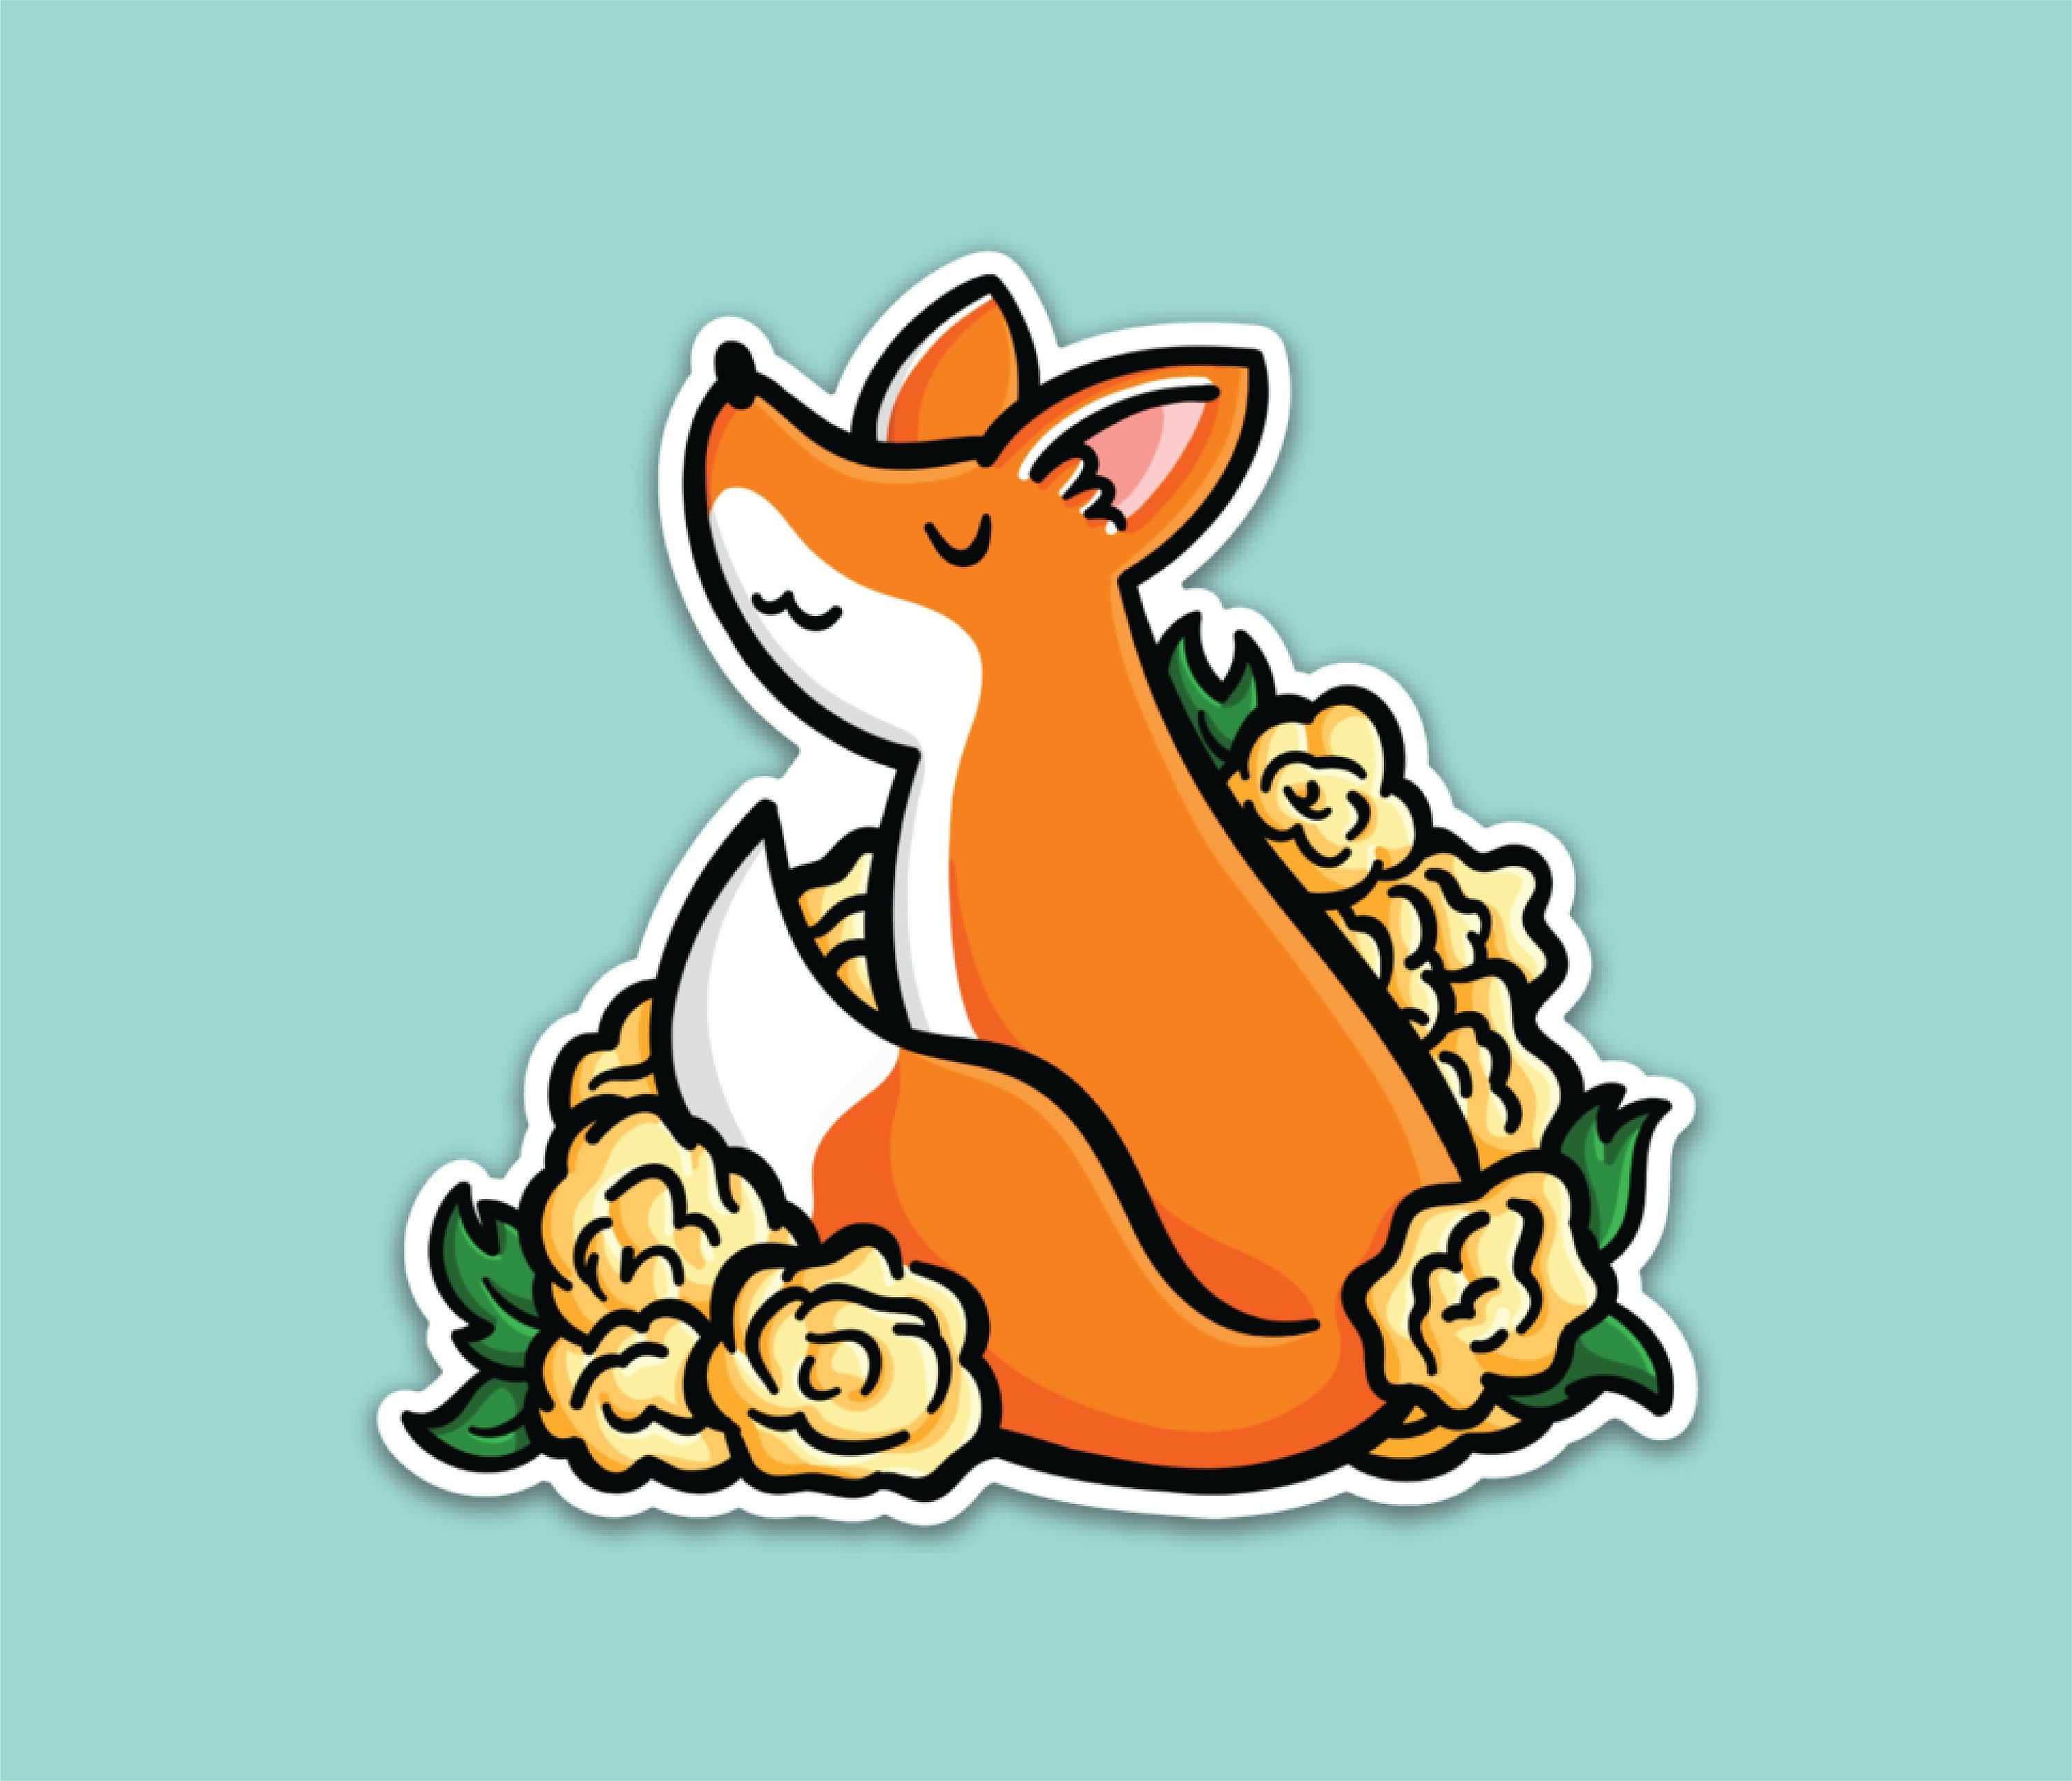 Fox with Yellow Roses Sticker (Discontinued!)